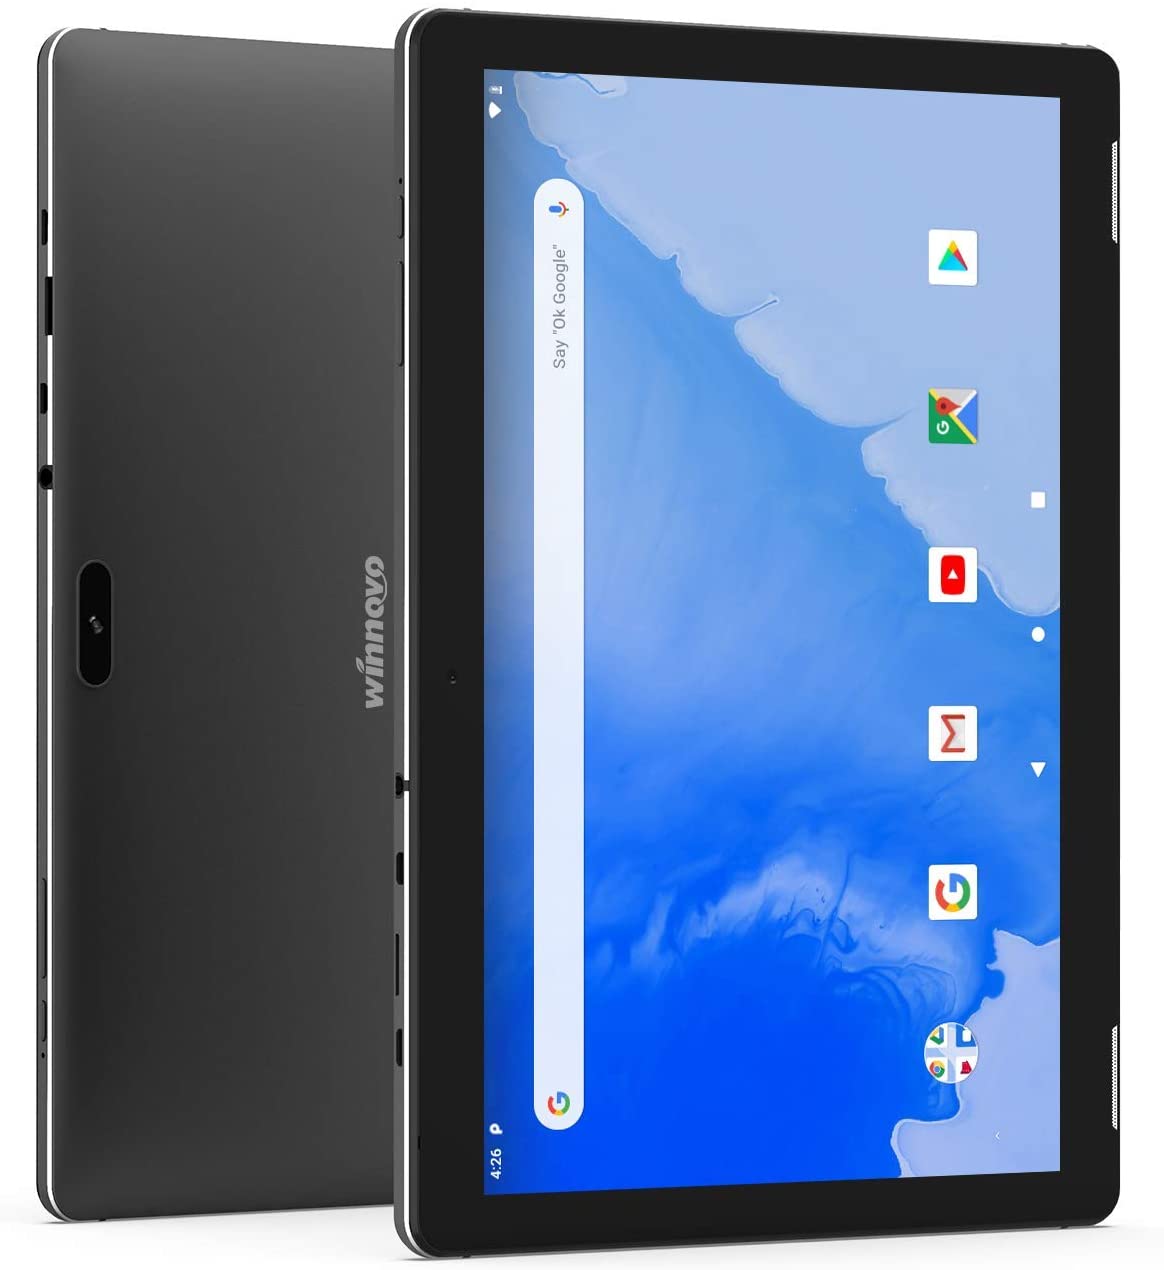 Android Tablet 10 Inch WiFi PC Tablets - Winnovo T10 MT8163 3GB RAM 32GB ROM HD IPS 1280x800 2.0MP+5.0MP Camera Gyroscope Accelerometer Bluetooth HDMI GPS FM Android 9.0 Pie (Black)